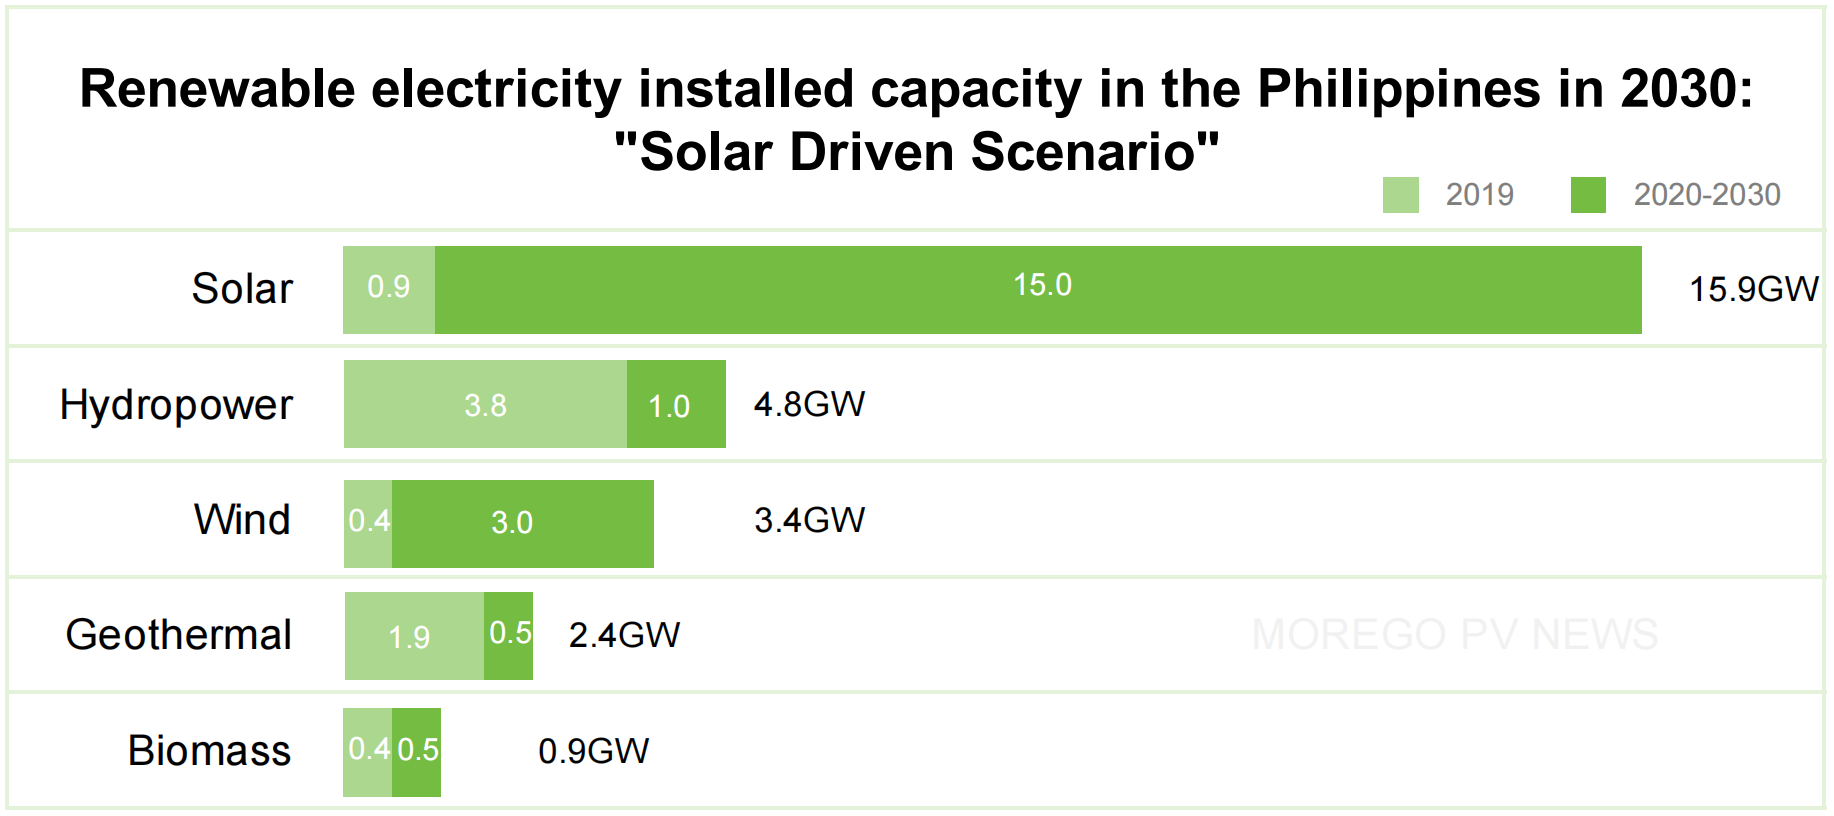 Renewable electricity installed capacity in the Philippines